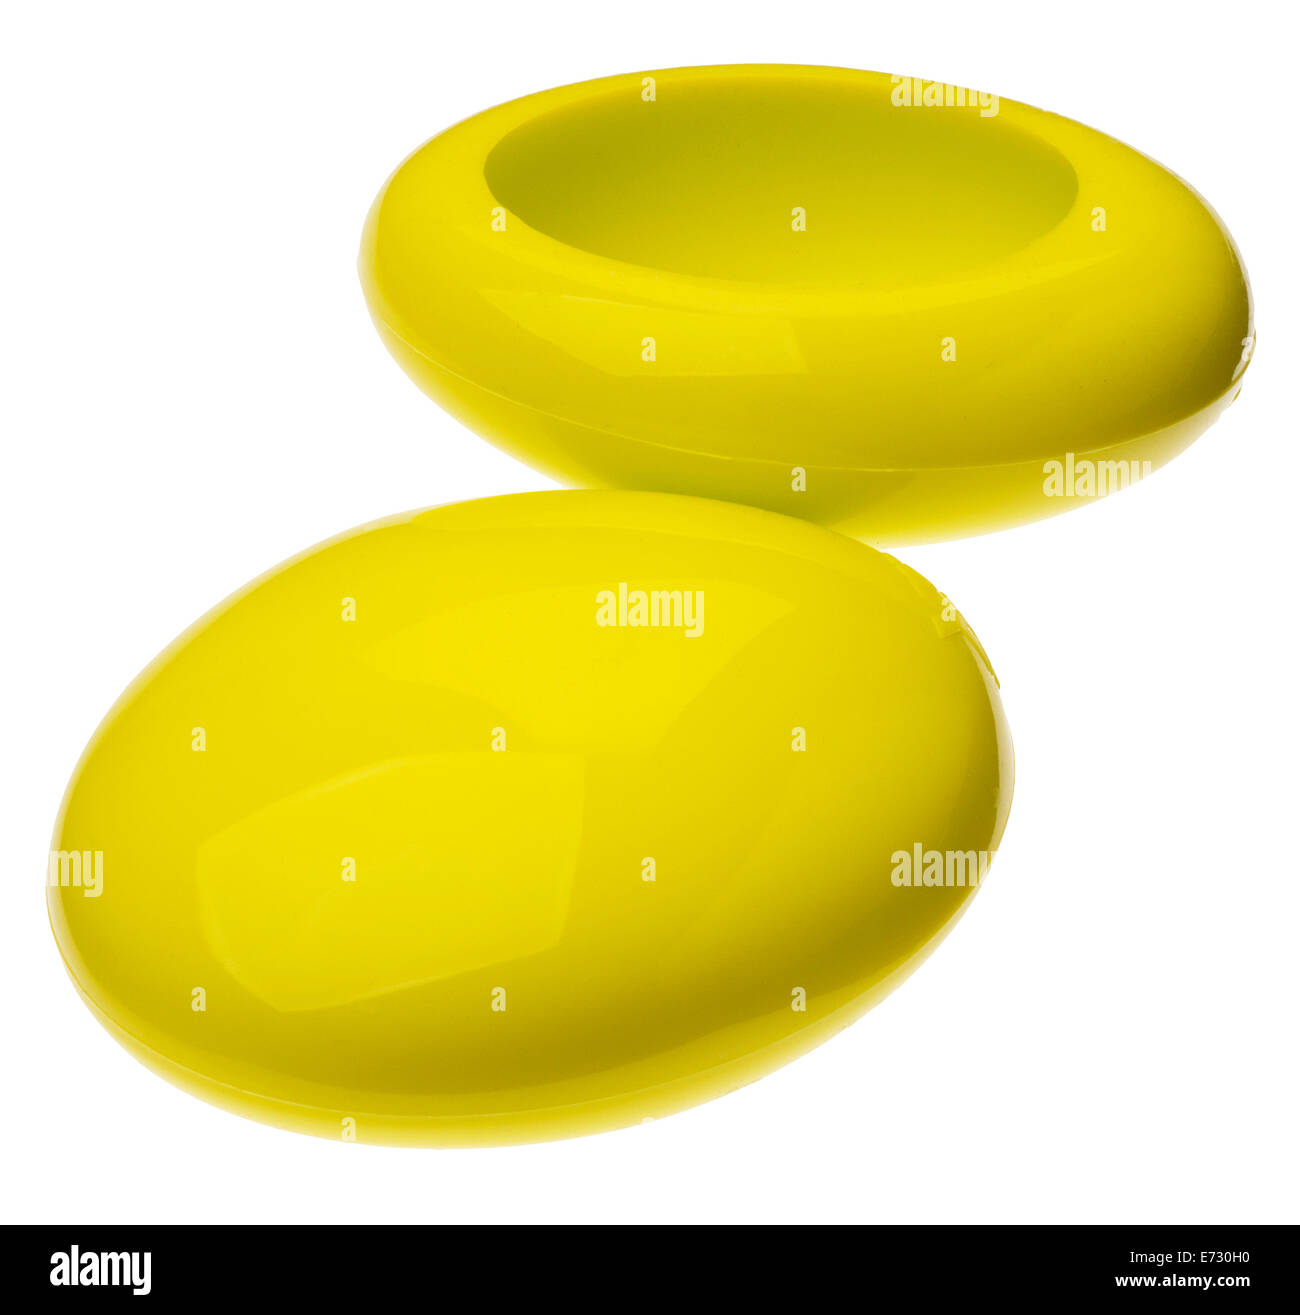 A pair of yellow silicone cups for supporting laptops, tablet computers or keyboards. Stock Photo